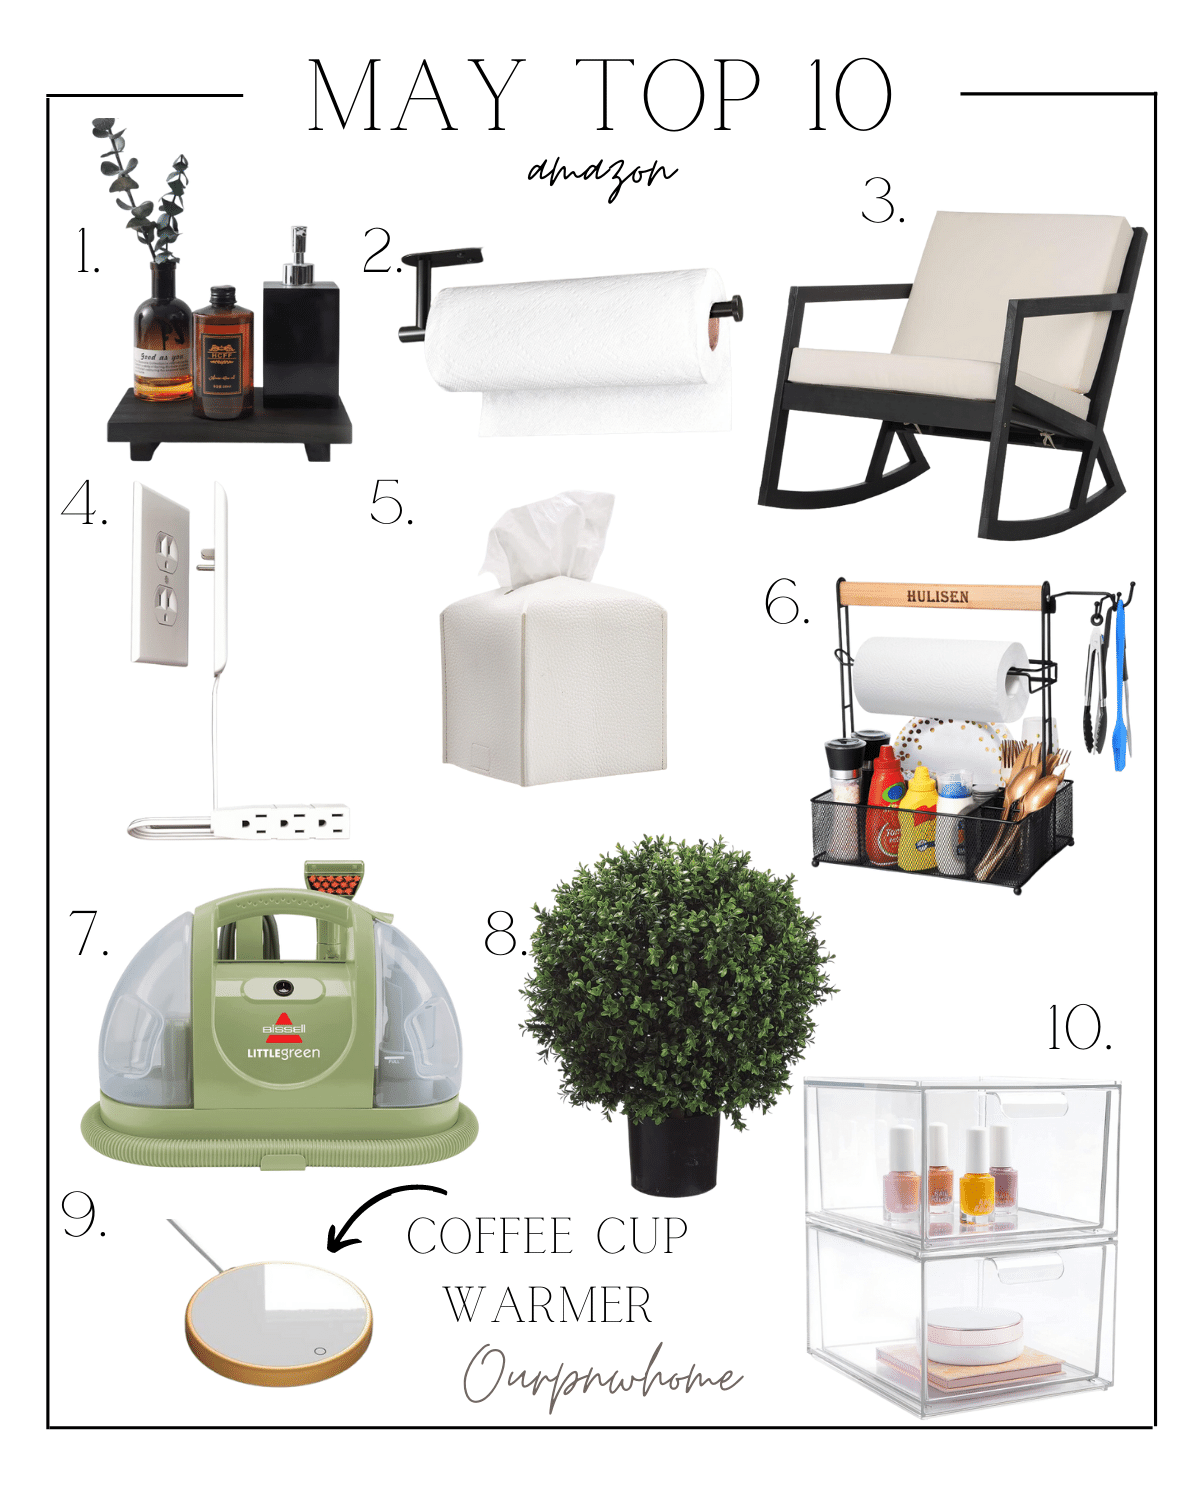 may top 10, sink table, paper towel hook, rocking chair, extension cord, home decor patio finds, camping essentials, topiary plant, bissell cleaner, coffee cup warmer, organizer, home finds, best sellers